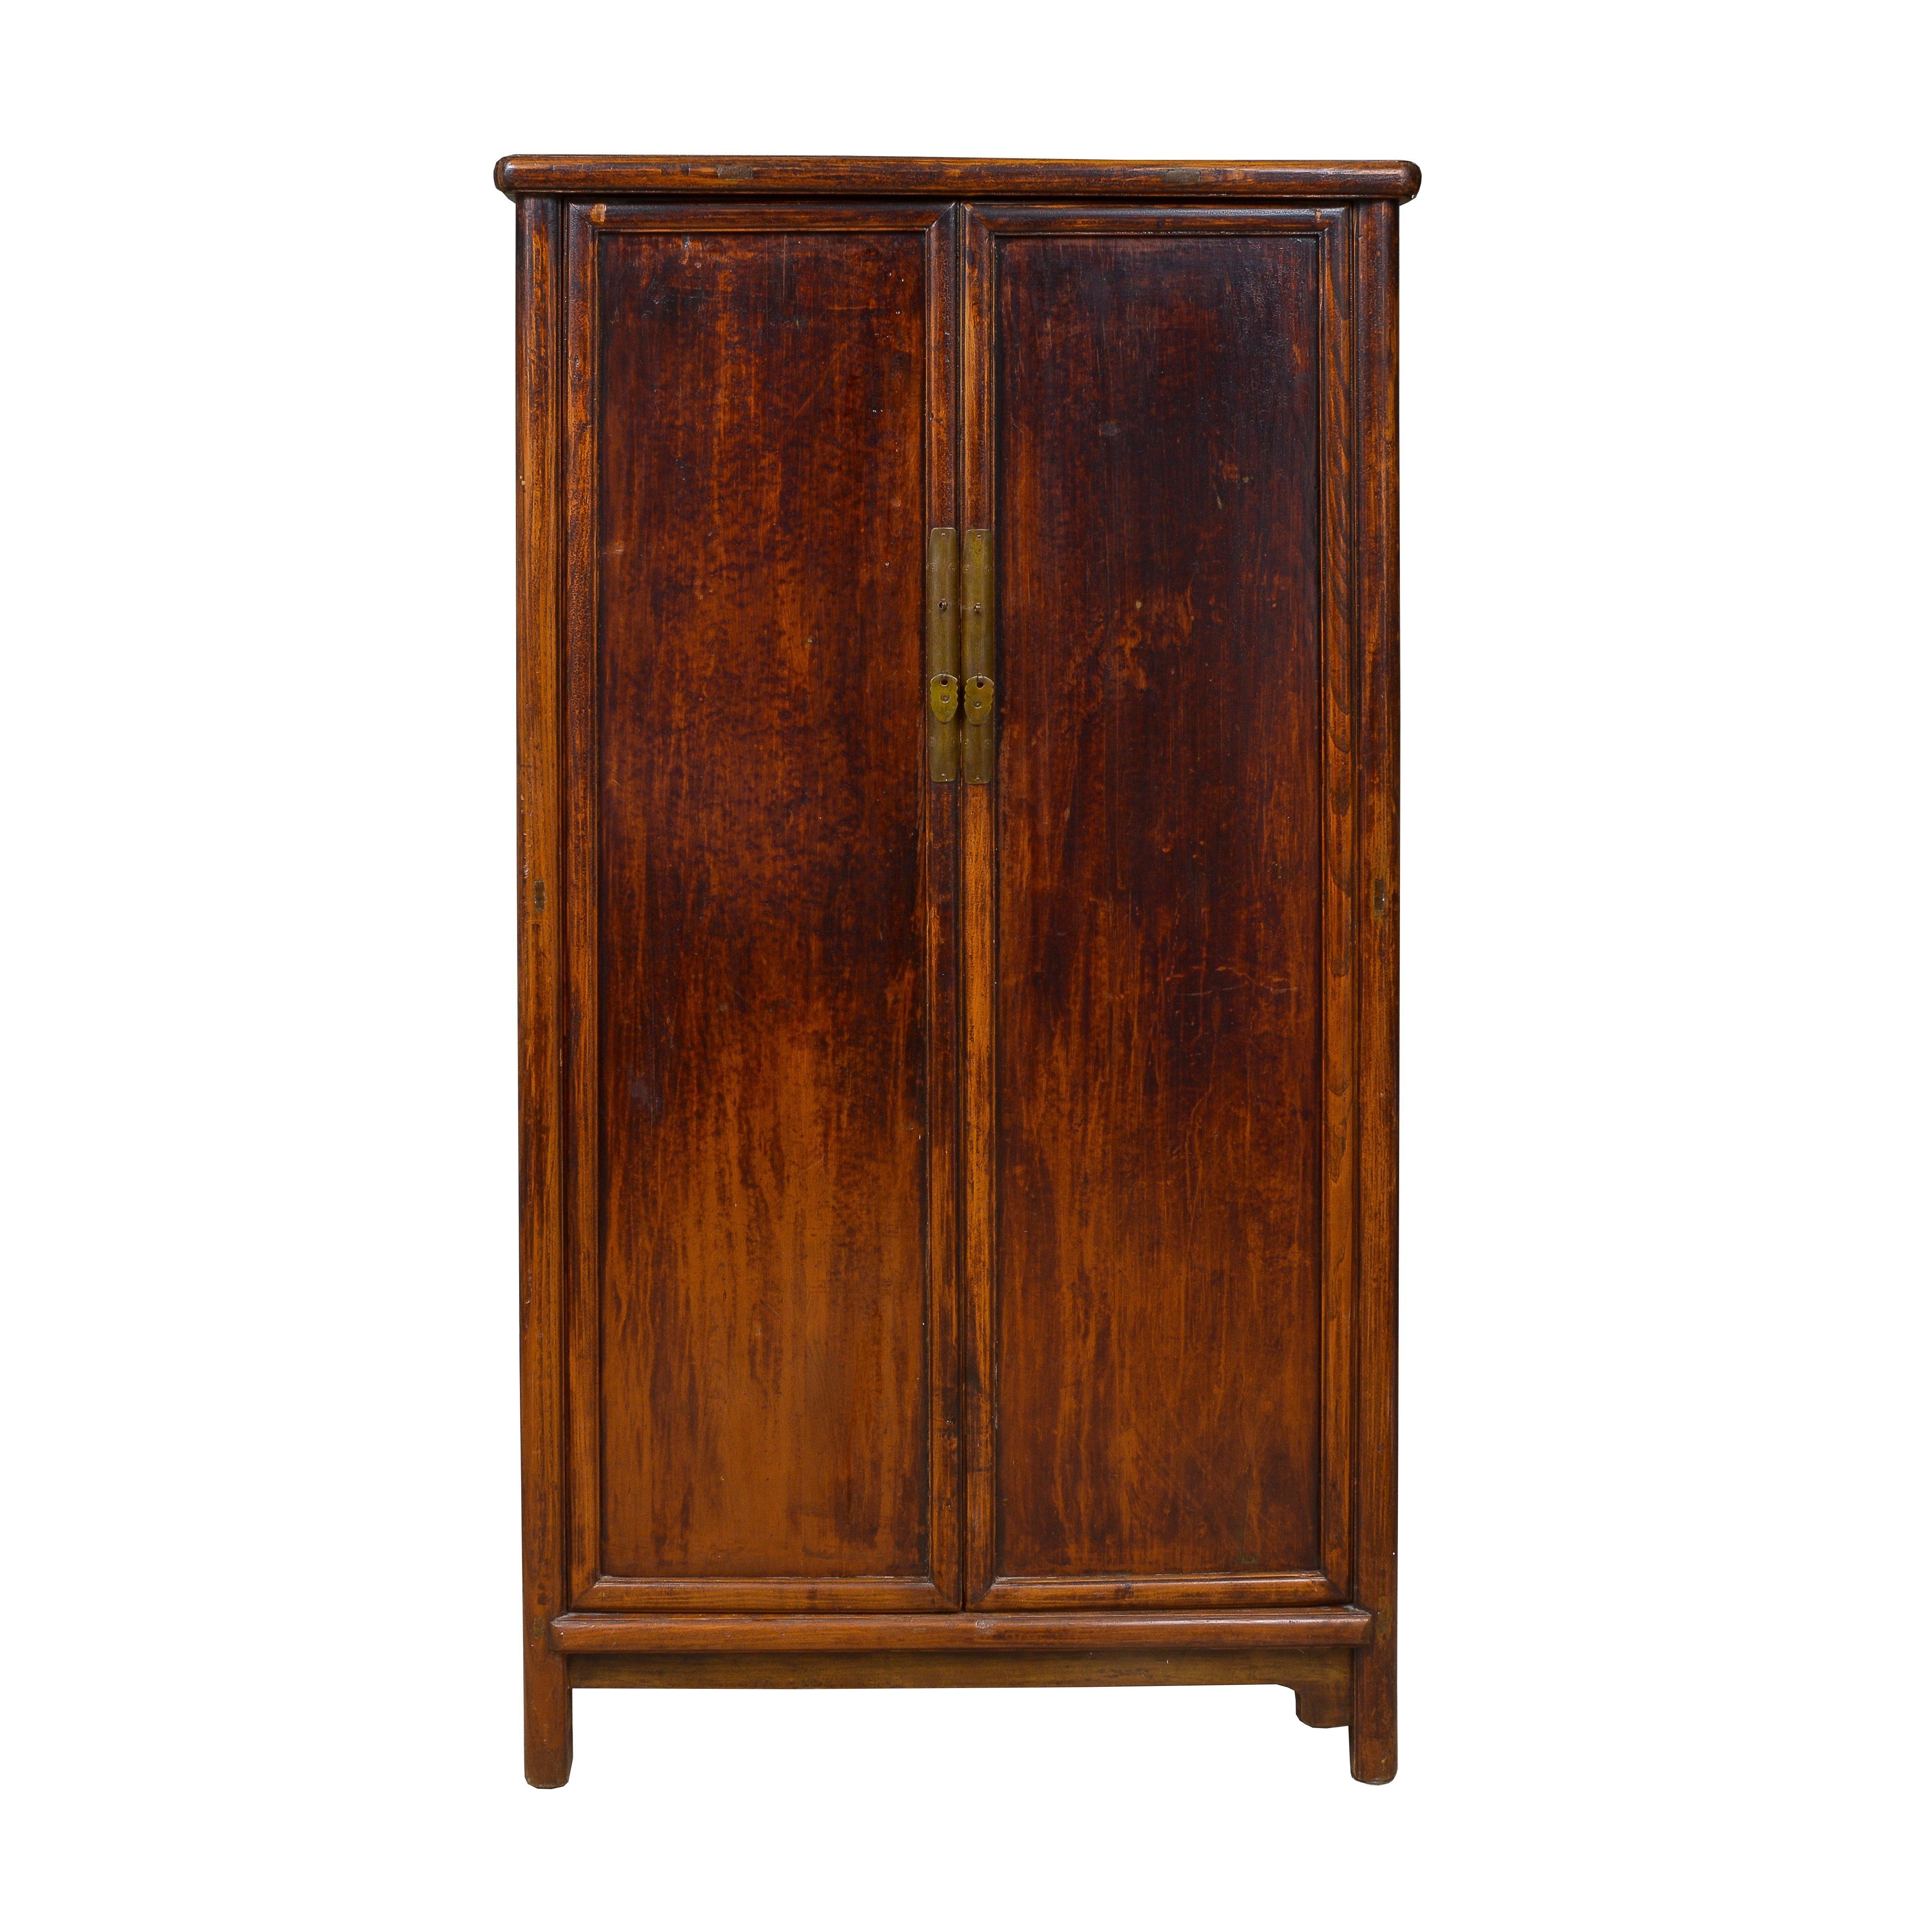 Tall armoire in Jumu wood with original red glaze with split storage and two middle drawers
Fitted with brass hardware
Pair of removable doors
Supported by high bracket feet